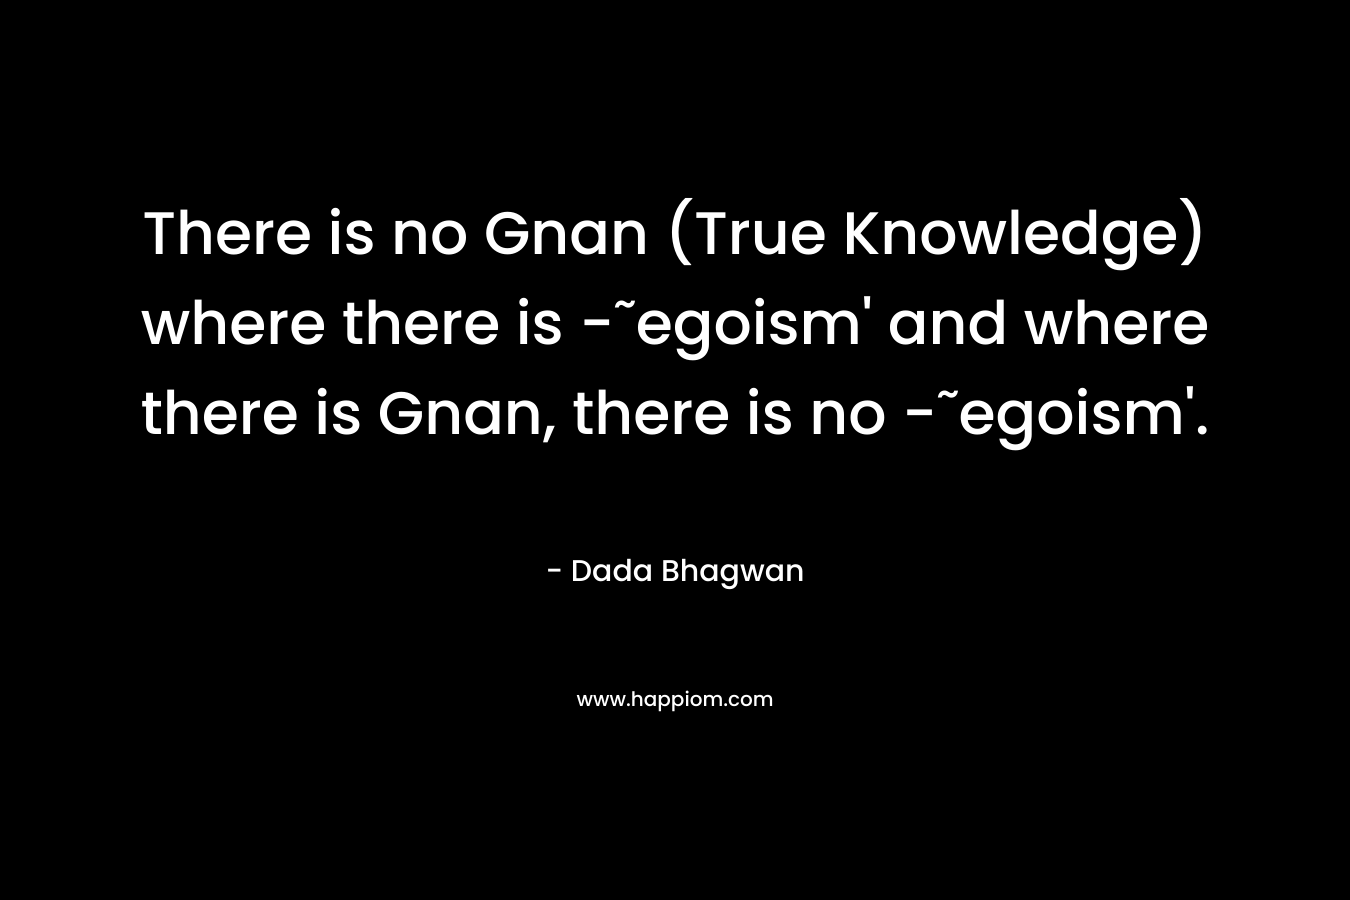 There is no Gnan (True Knowledge) where there is -˜egoism’ and where there is Gnan, there is no -˜egoism’. – Dada Bhagwan